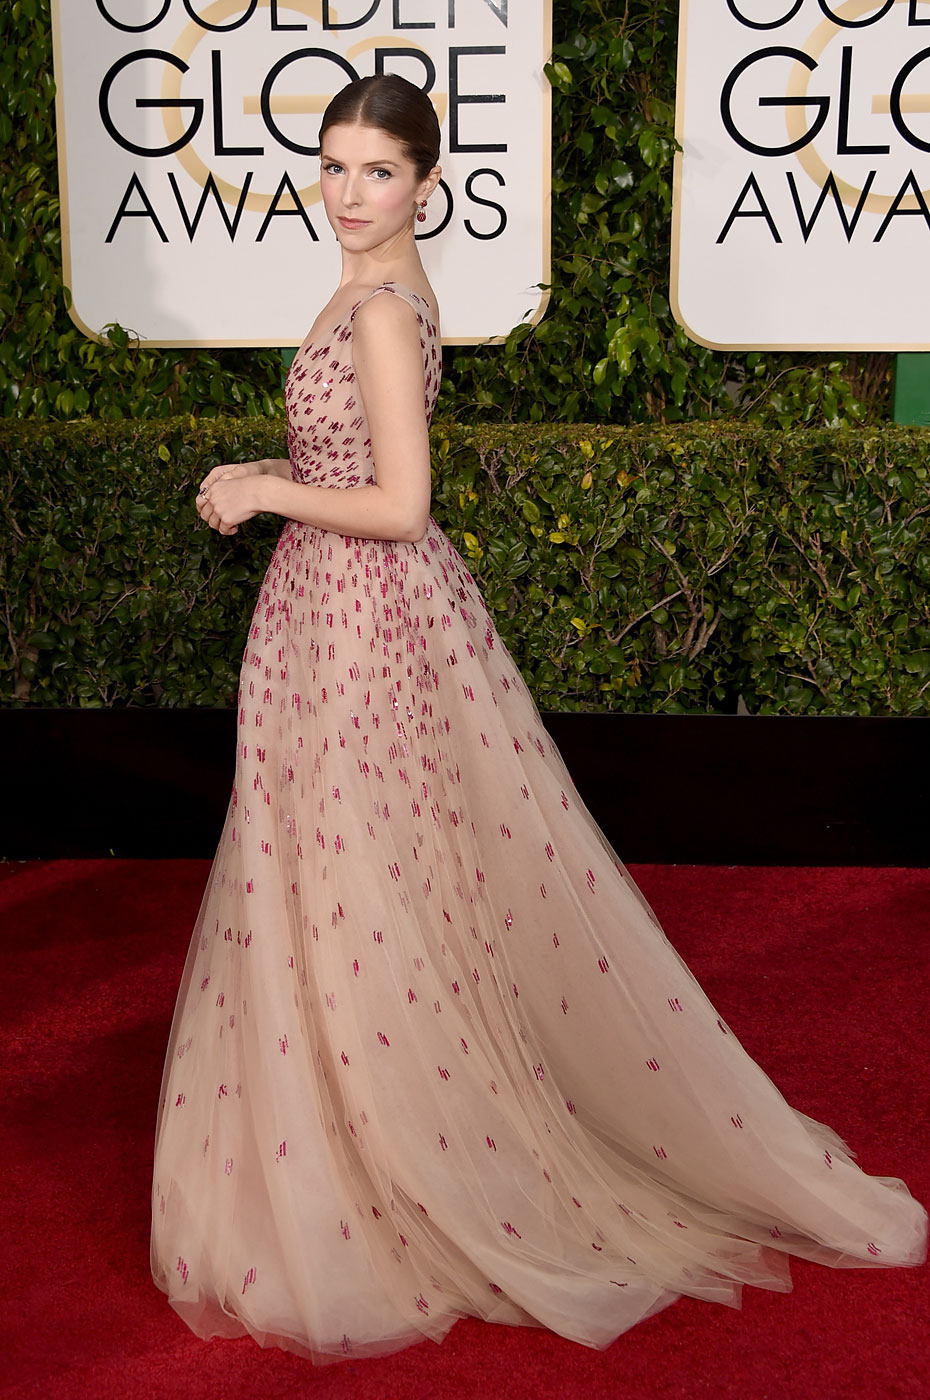 Anna Kendrick attends the 72nd Annual Golden Globe Awards at The Beverly Hilton Hotel on Jan. 11, 2015 in Beverly Hills, Calif.